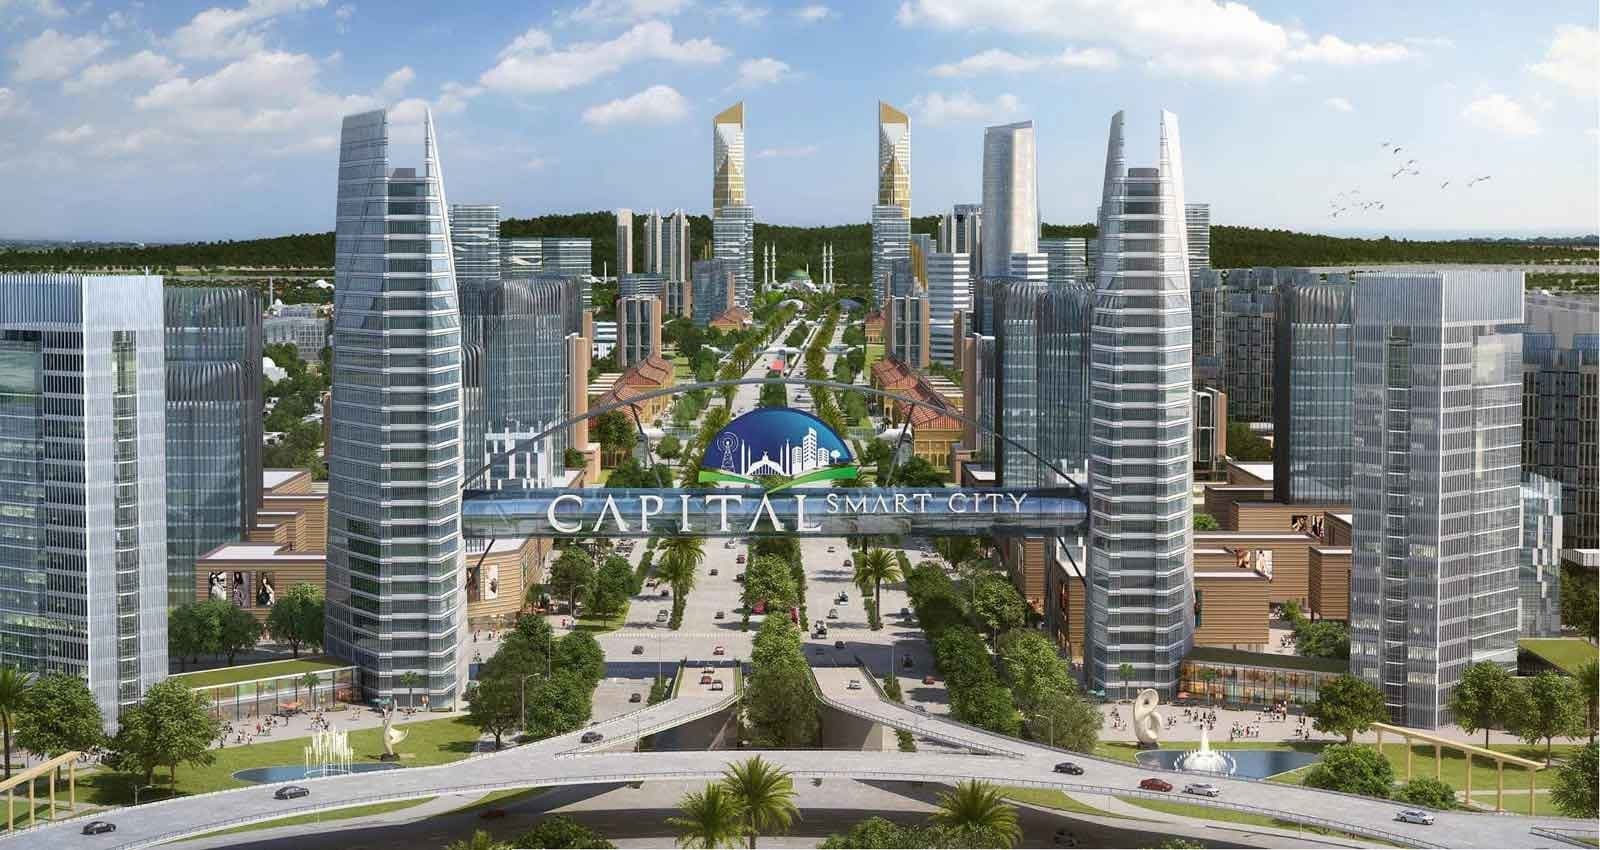 Capital Smart City Is Raising The Bar For Residential Development In Pakistan   